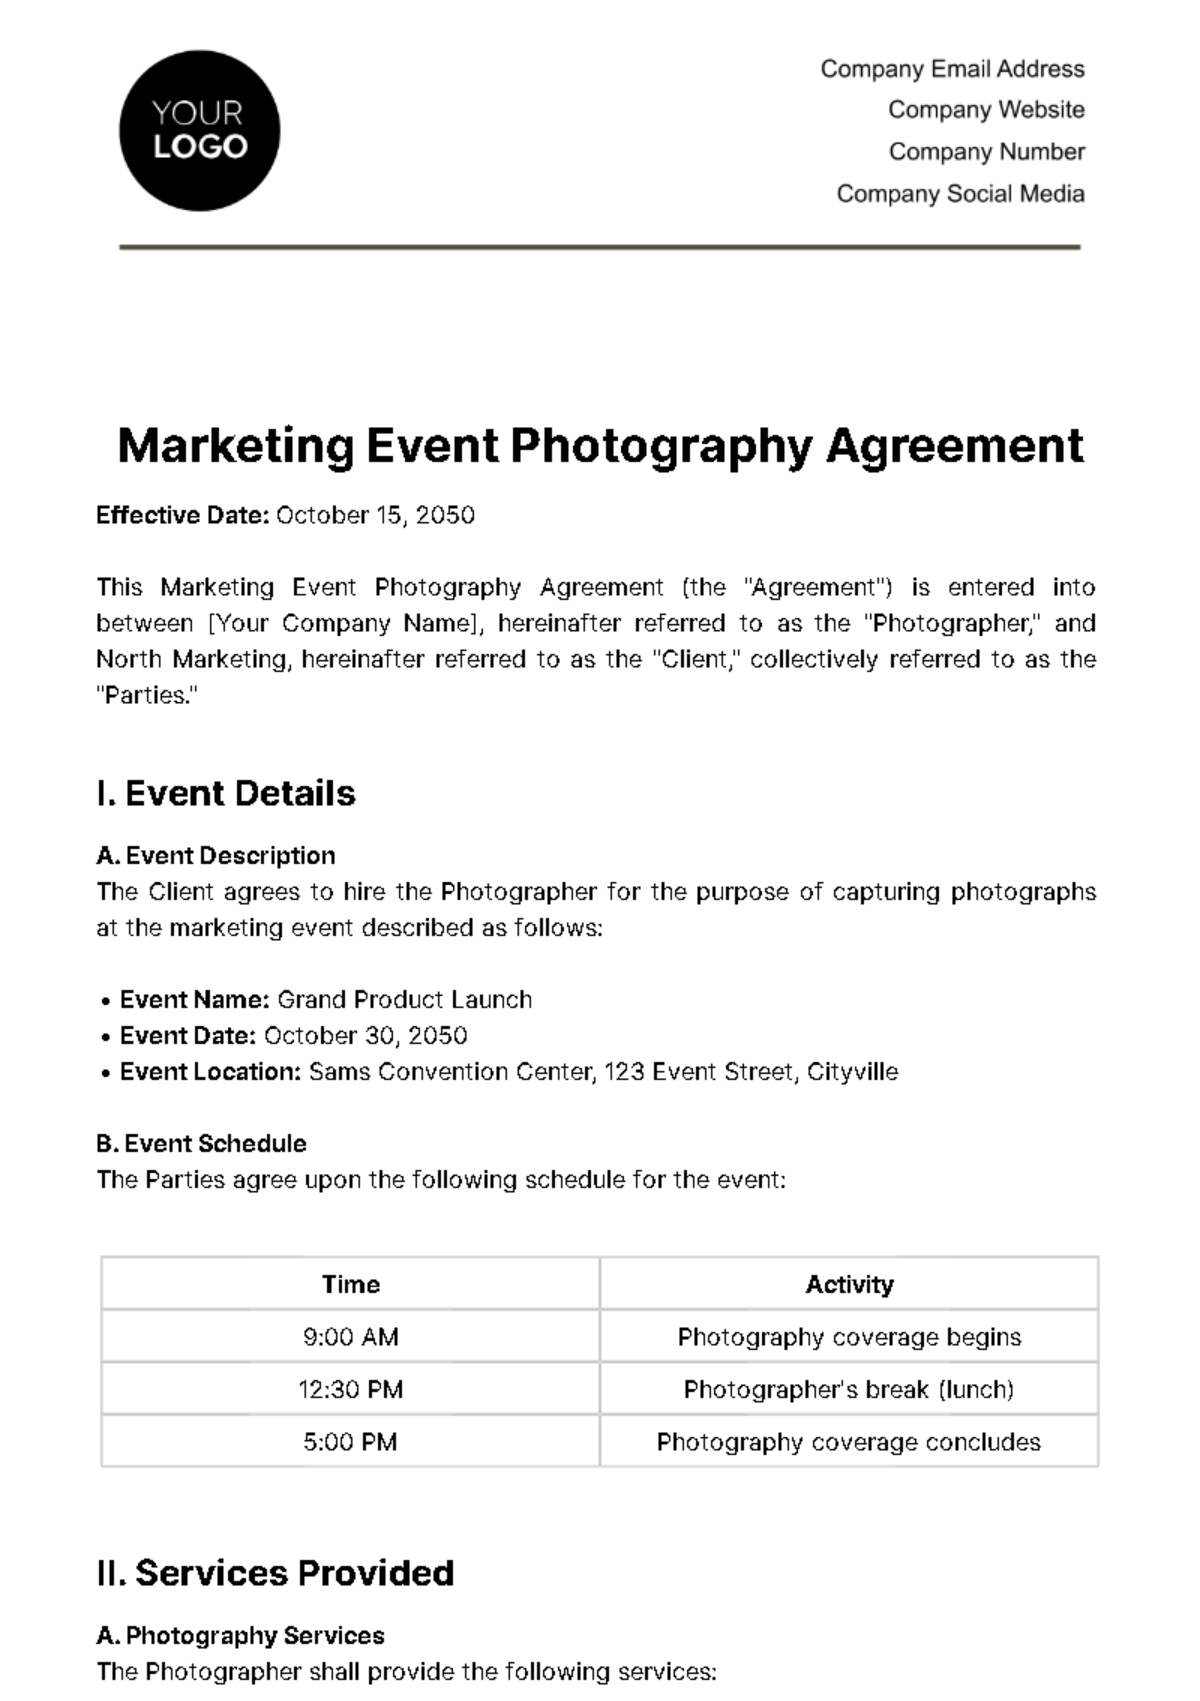 Free Marketing Event Photography Agreement Template